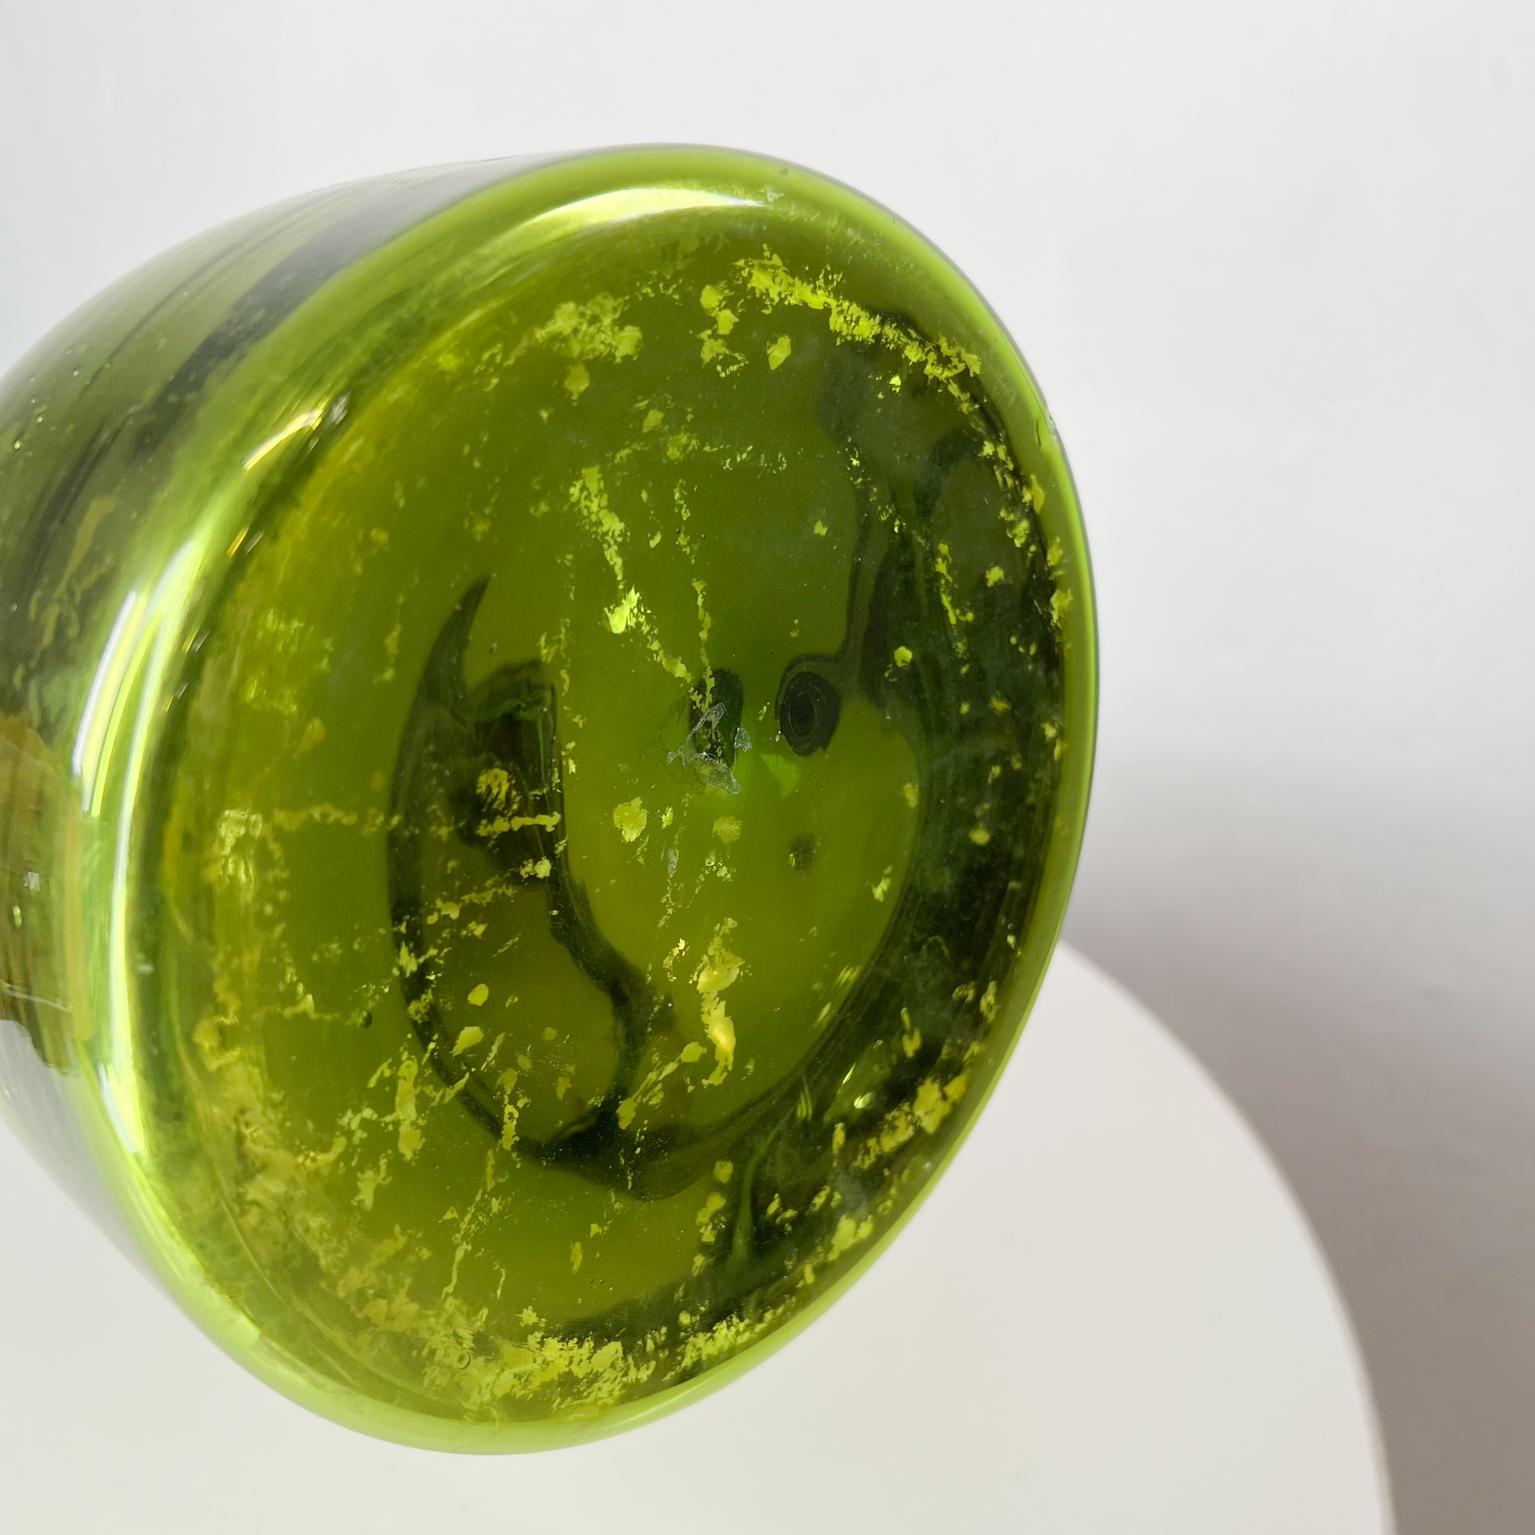 1970s Vintage Modern Green Vase Weed Pot in Mercury Glass For Sale 2